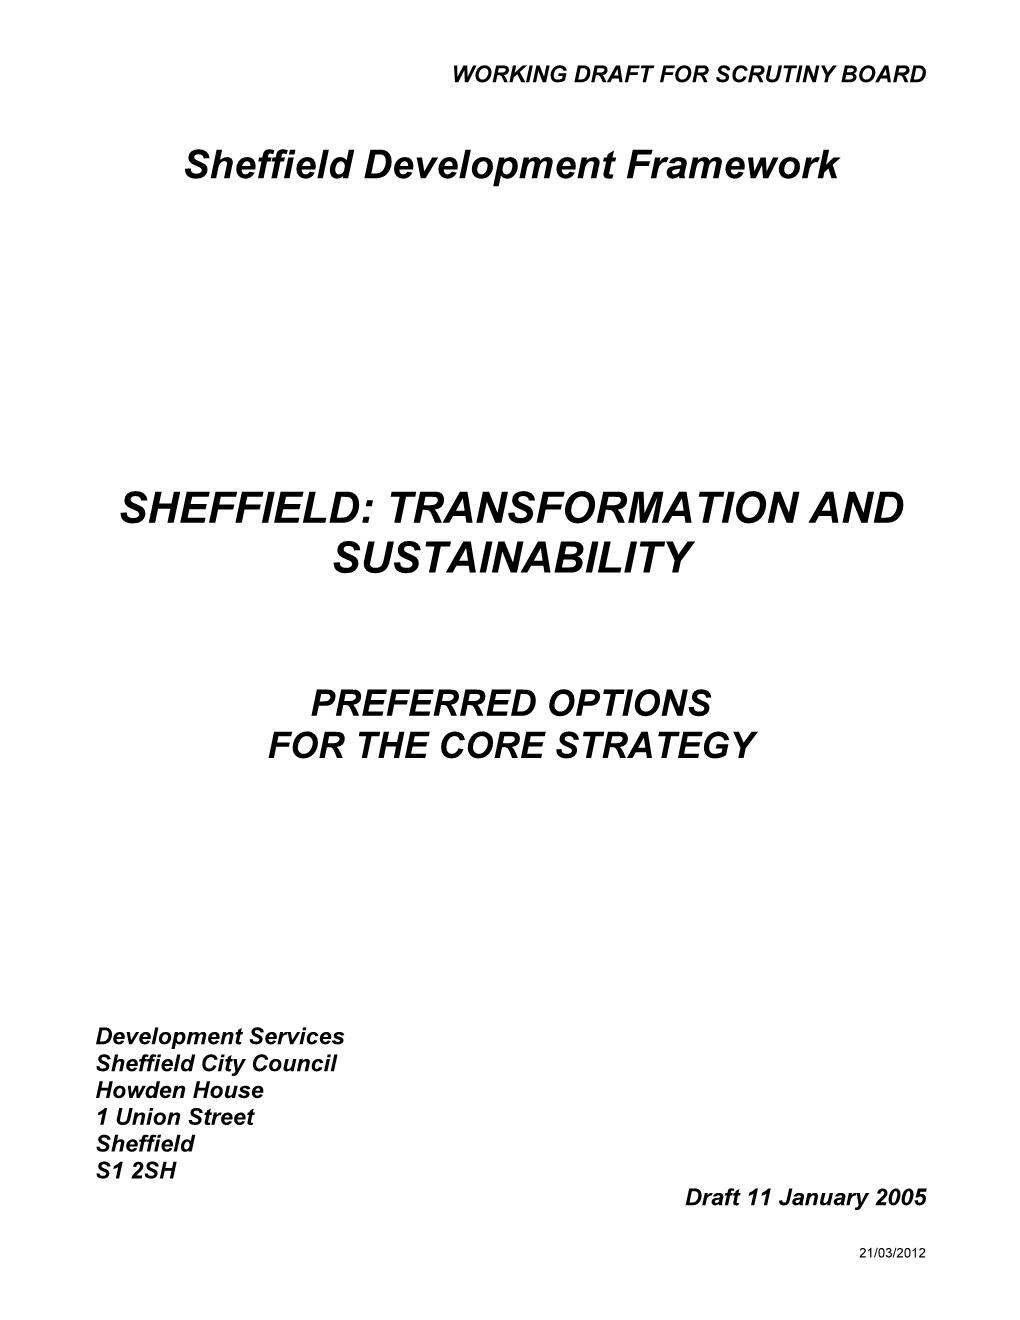 Sheffield: Transformation and Sustainability